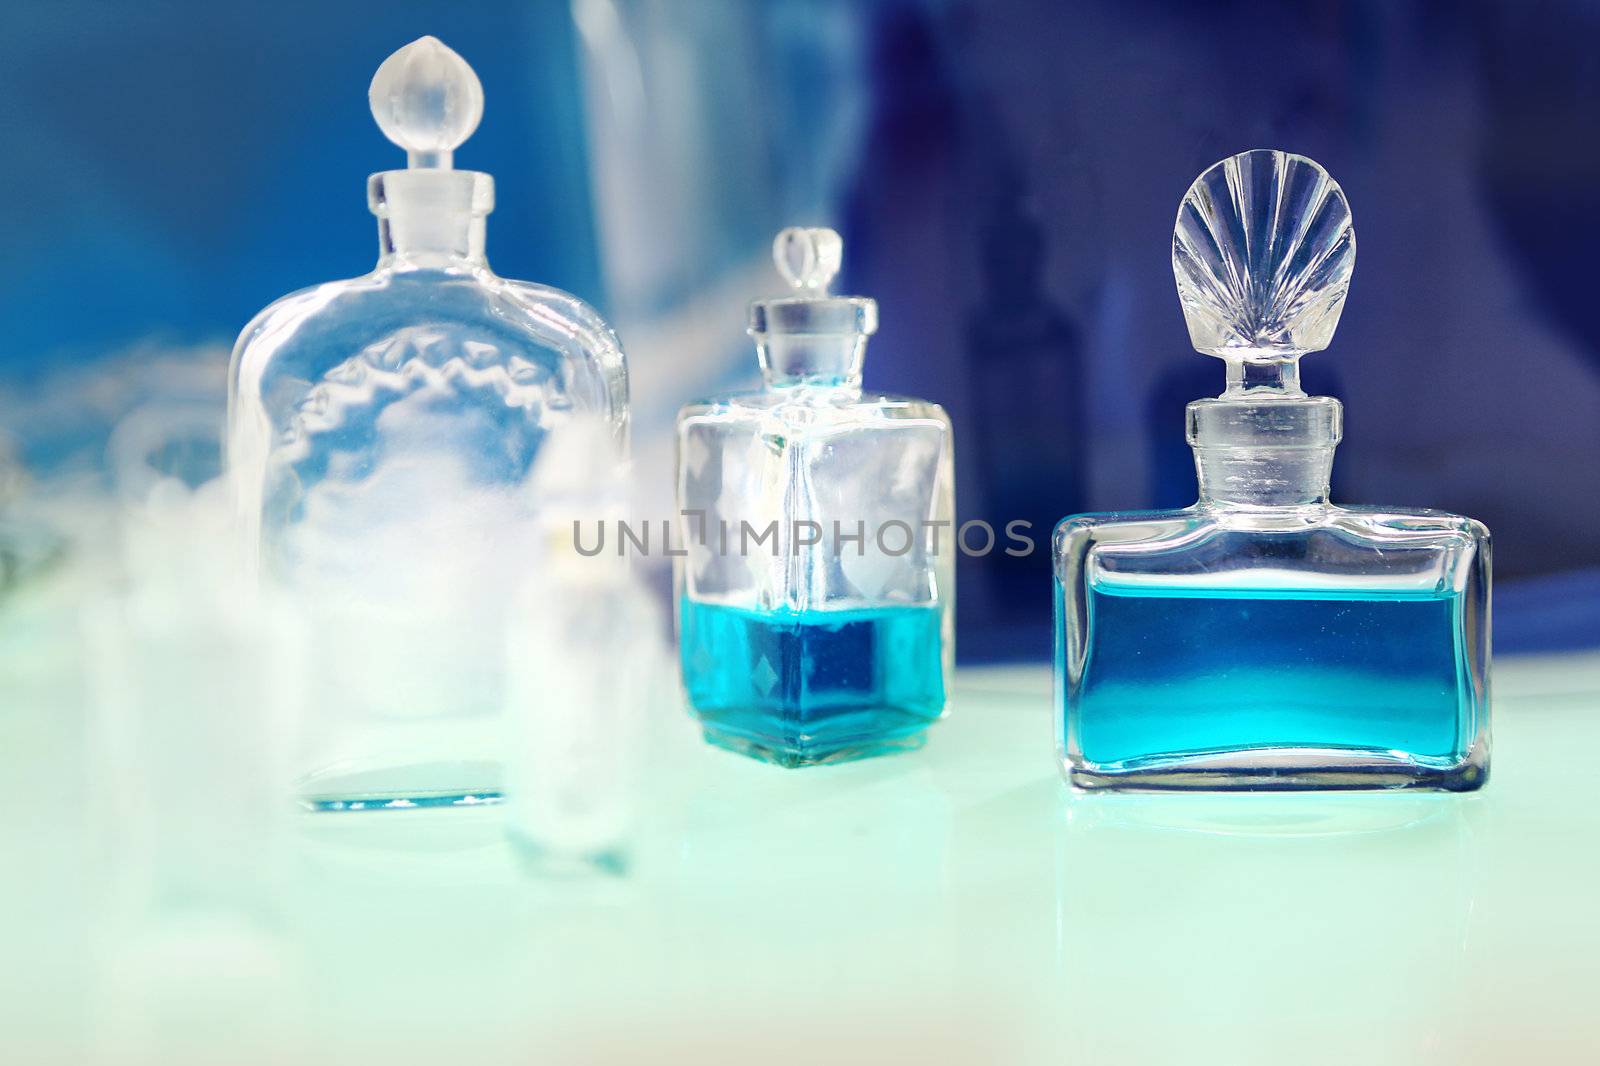 Perfume on the green table by robert_przybysz